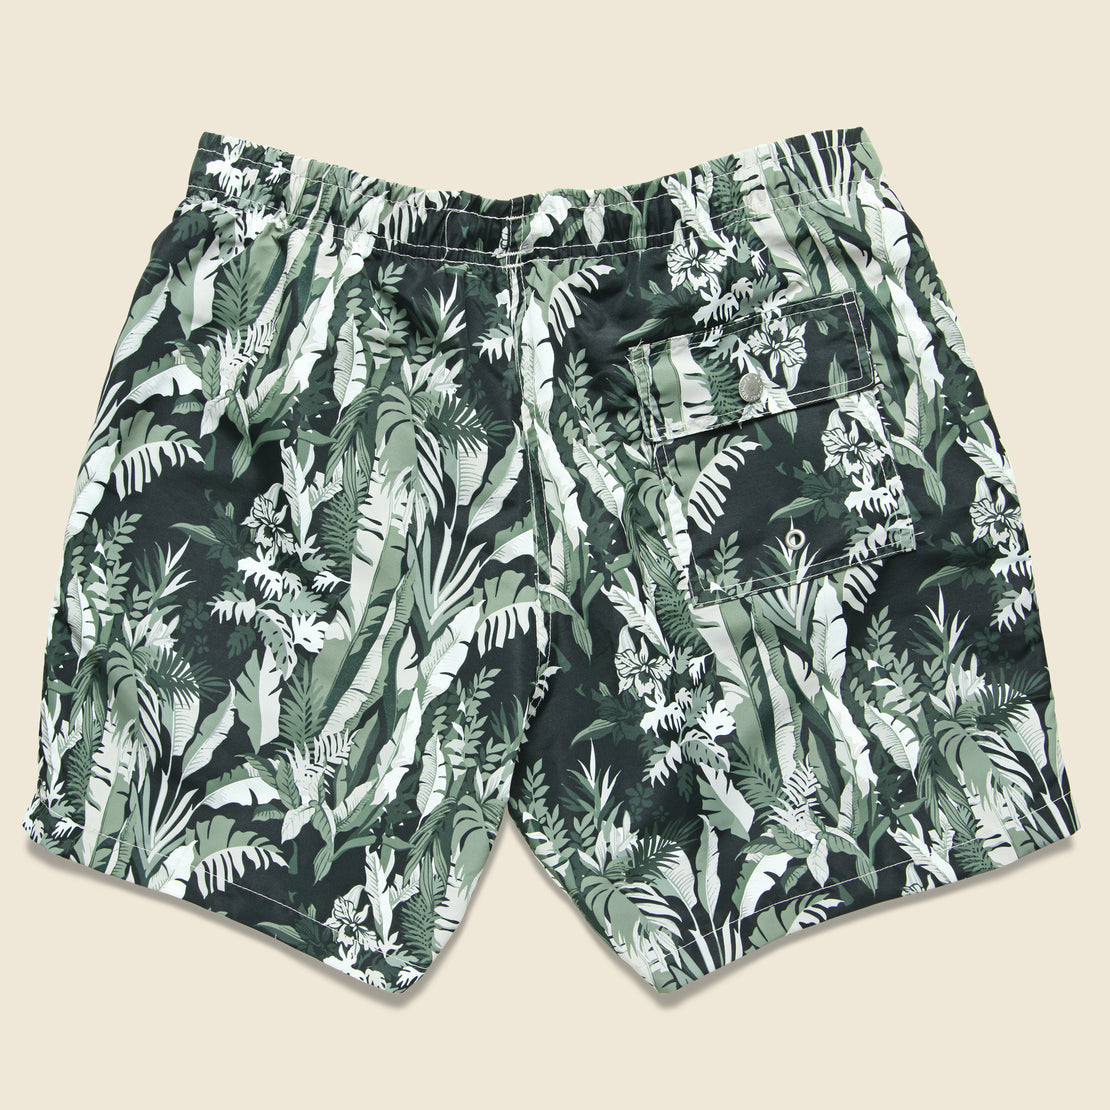 Tropical Forest Swim Trunk - Green - Bather Trunk Co. - STAG Provisions - Shorts - Swim